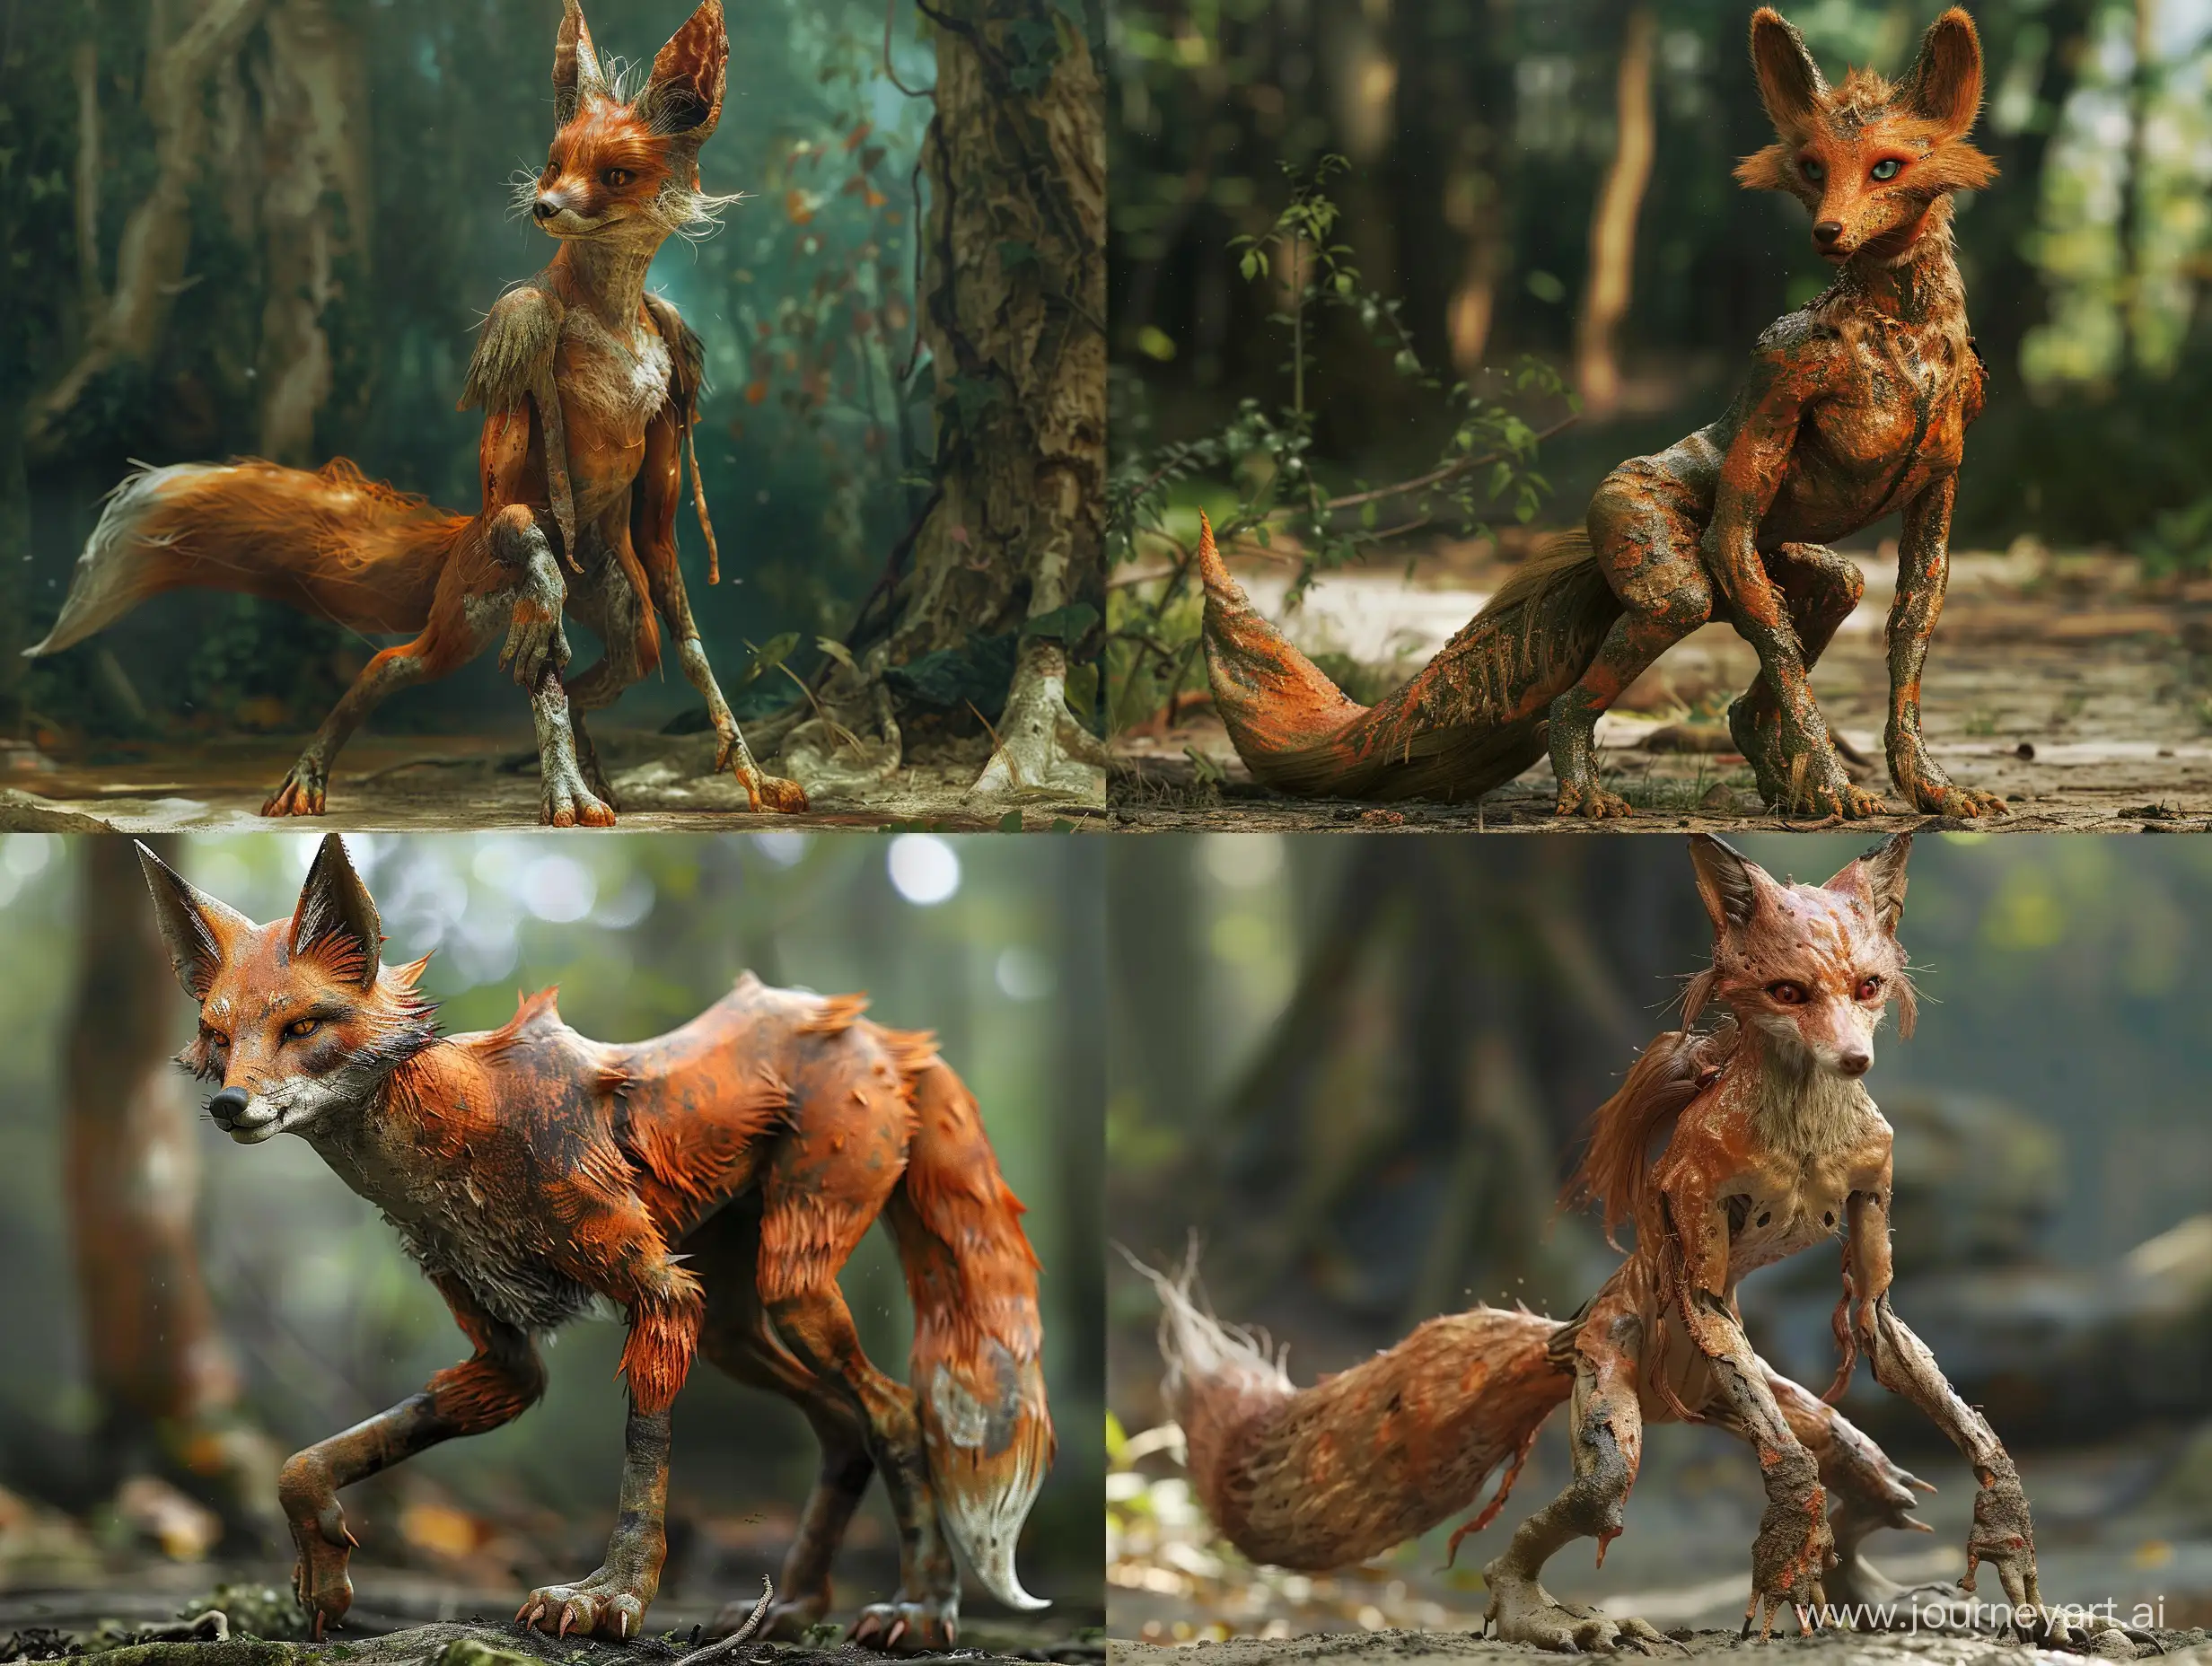 A medieval princess who has been transformed into a fox due to a magic spell. She has a snout, a tail and paws. She has no human features left. She is standing on all fours in a forest. Realistic, full body picture